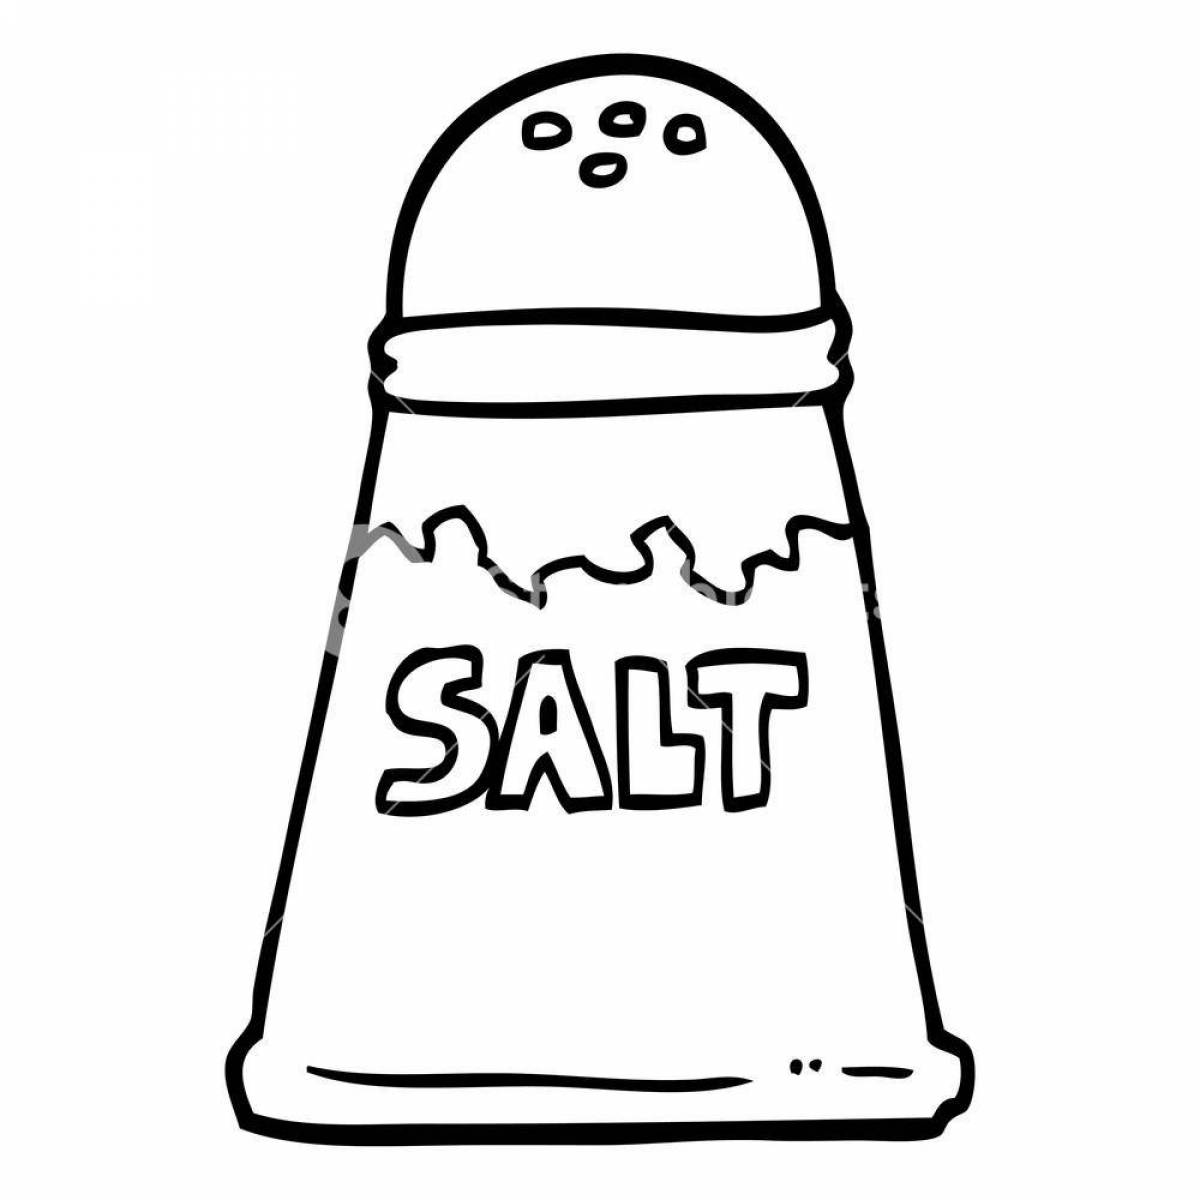 Exciting salt shaker coloring page